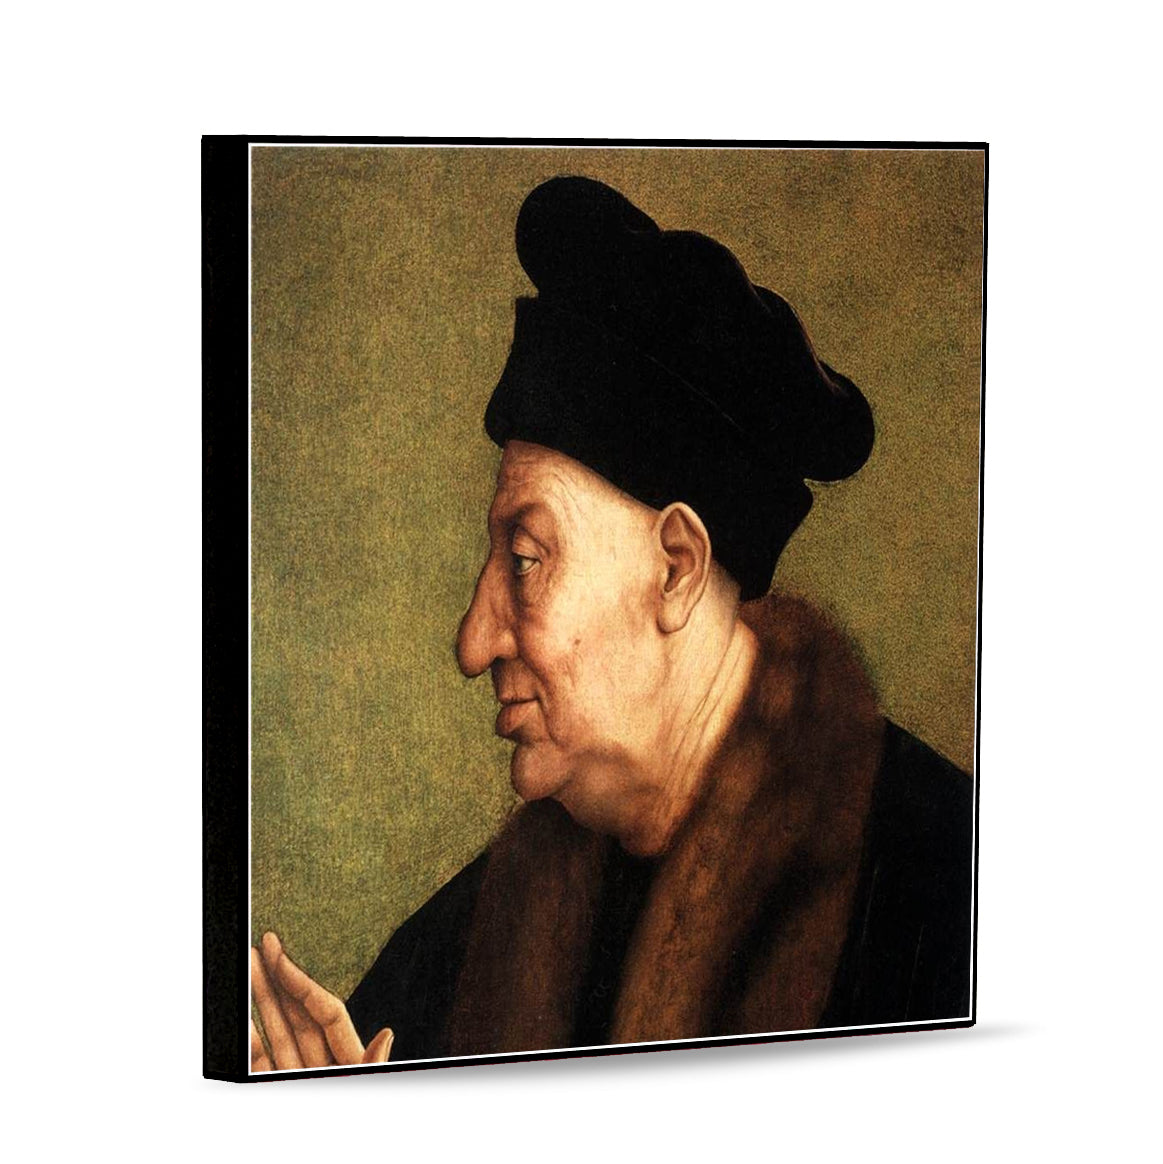 AFFRESCO: Panel Tile - Opera "Portrait of an Old Man" by Quentin Metsys